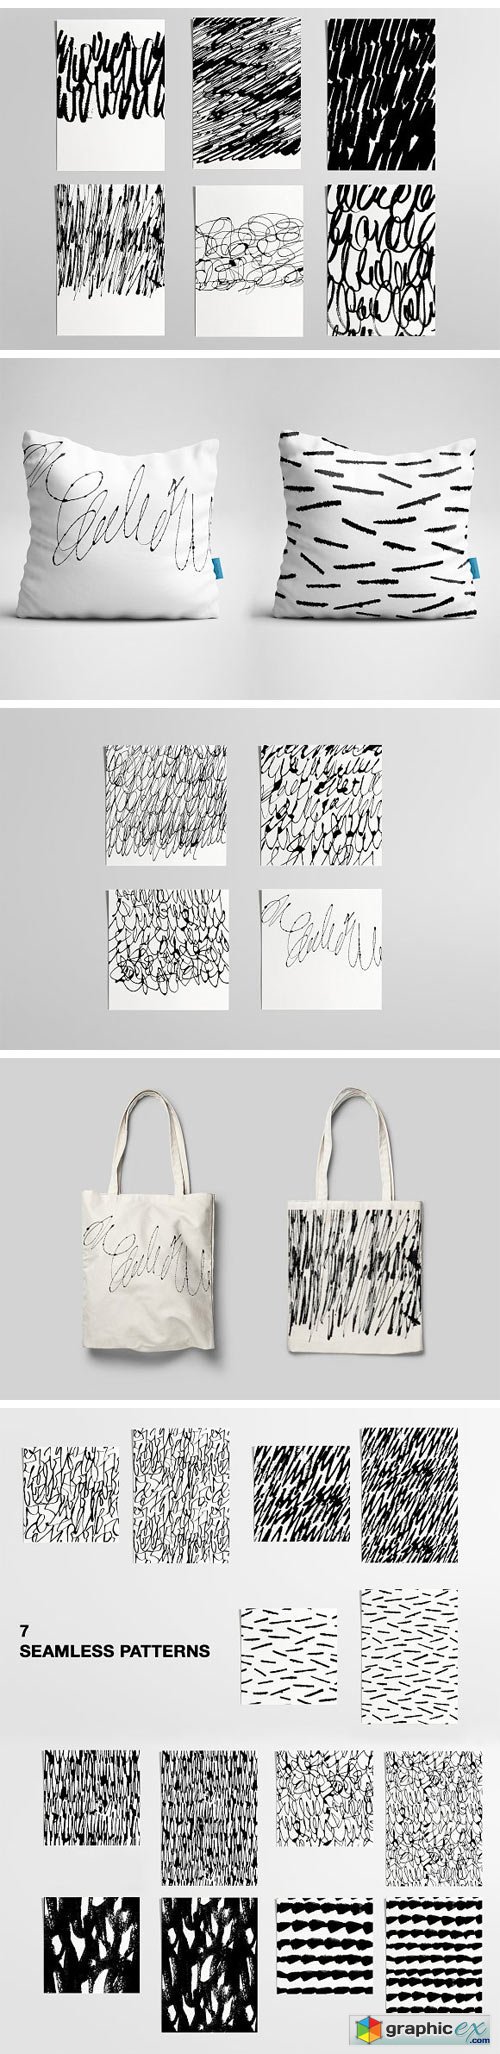 CALLIGRAPHY INSPIRED PATTERNS